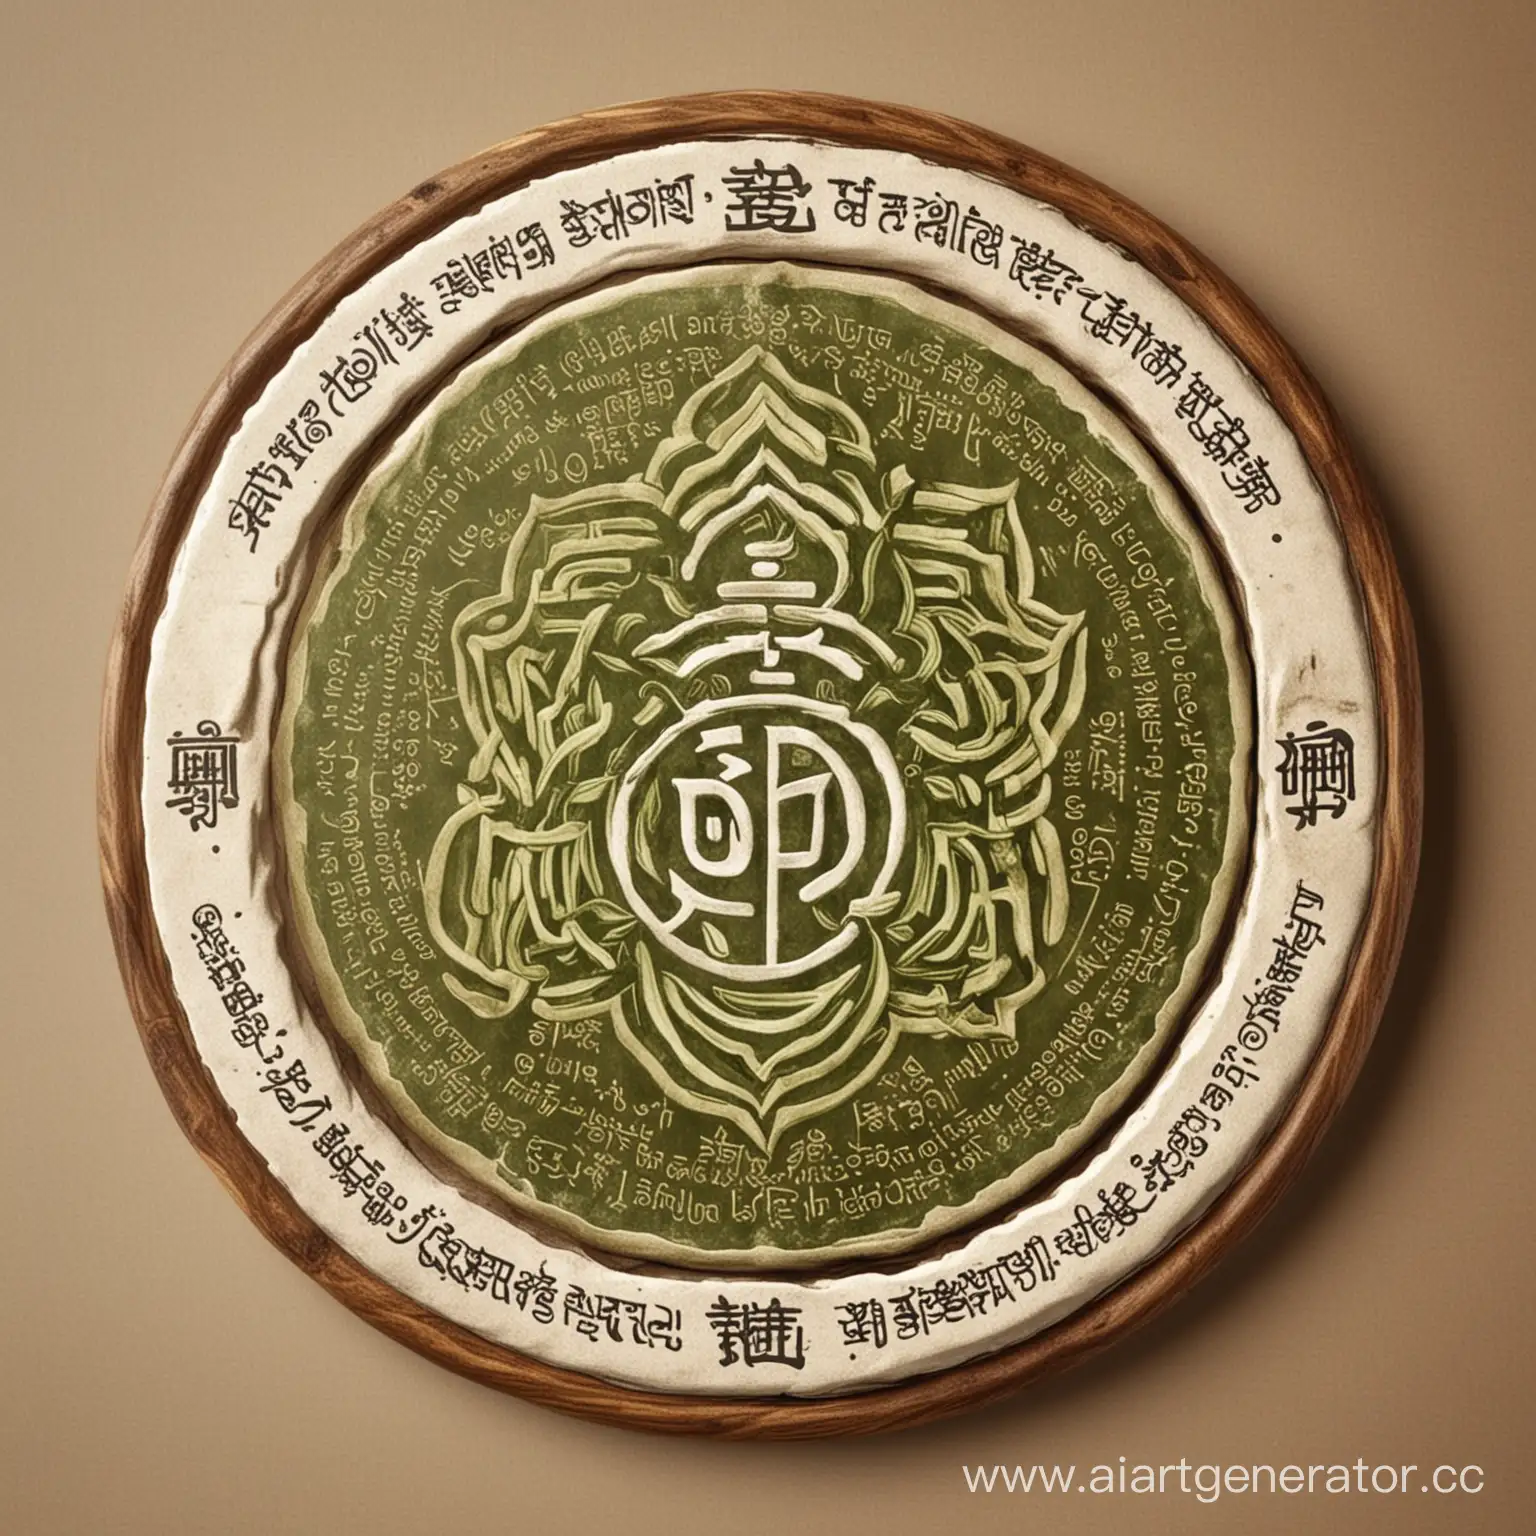 Centered-Logo-with-Business-Ecology-and-Buddhist-Themes